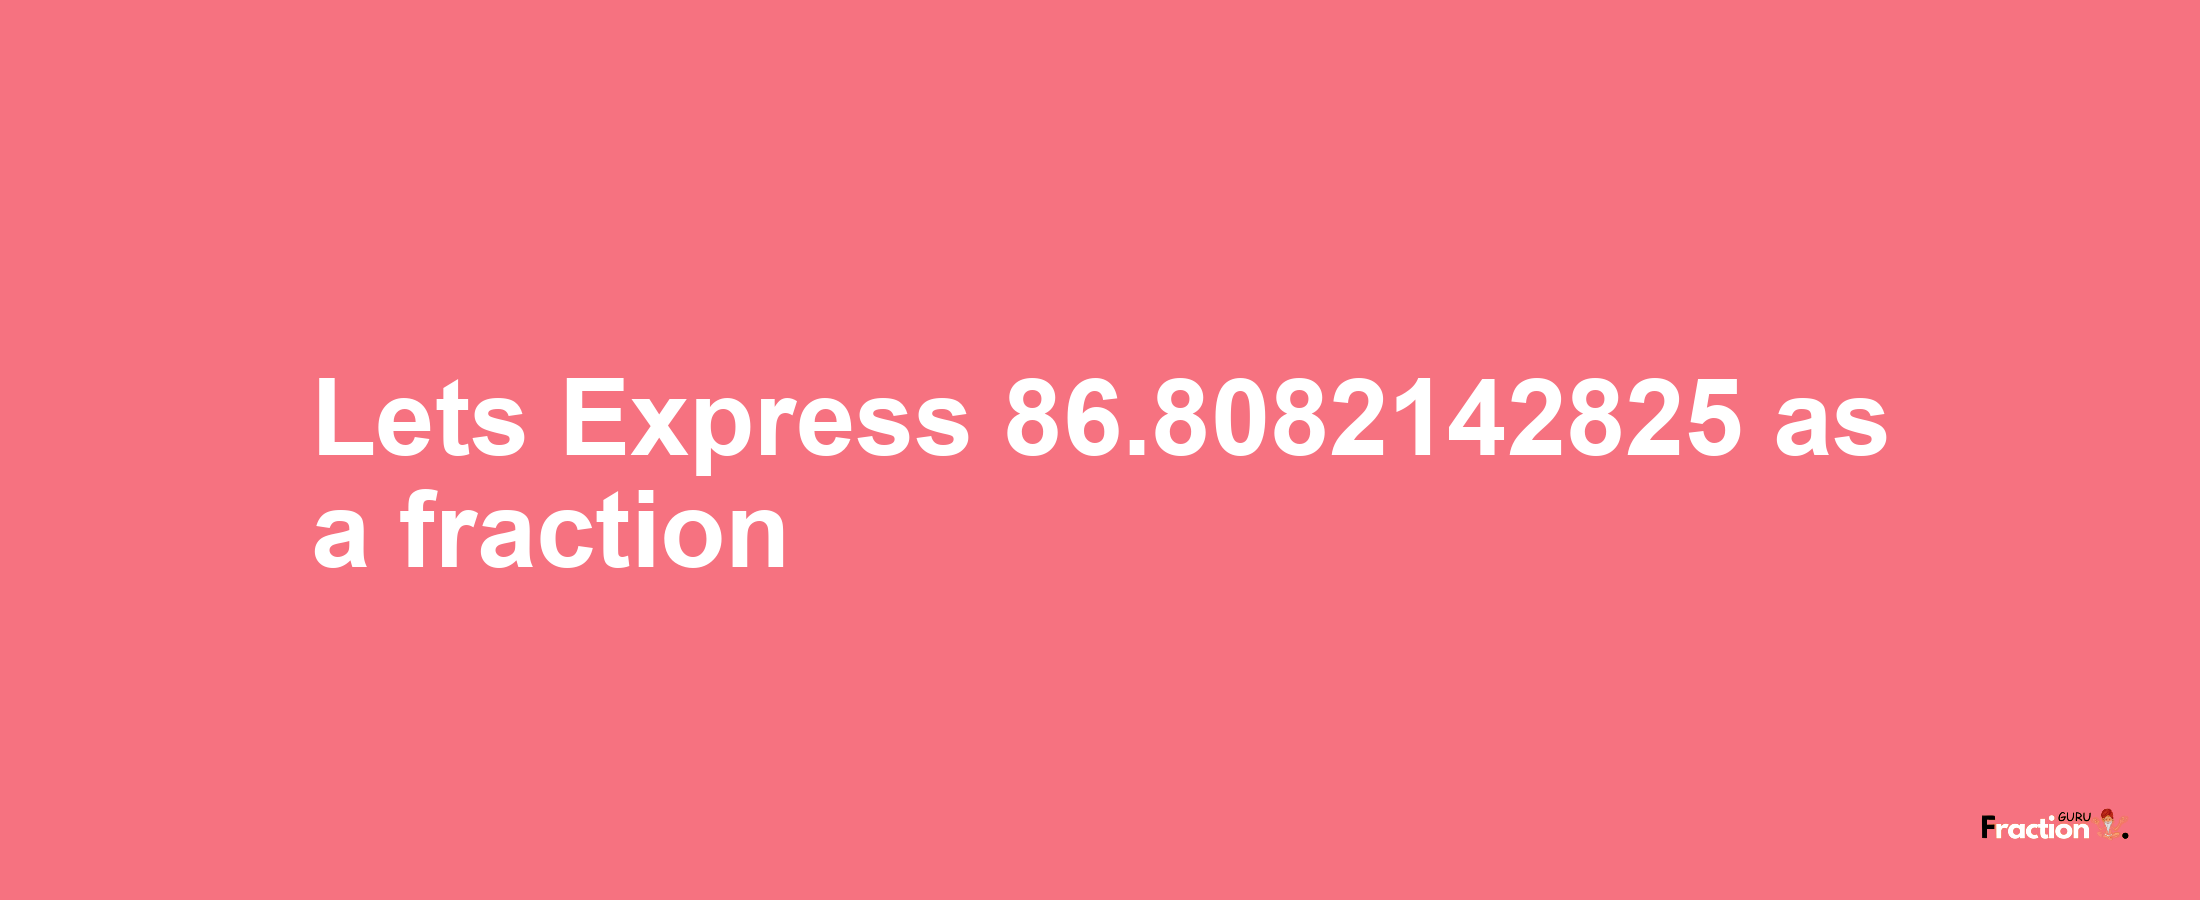 Lets Express 86.8082142825 as afraction